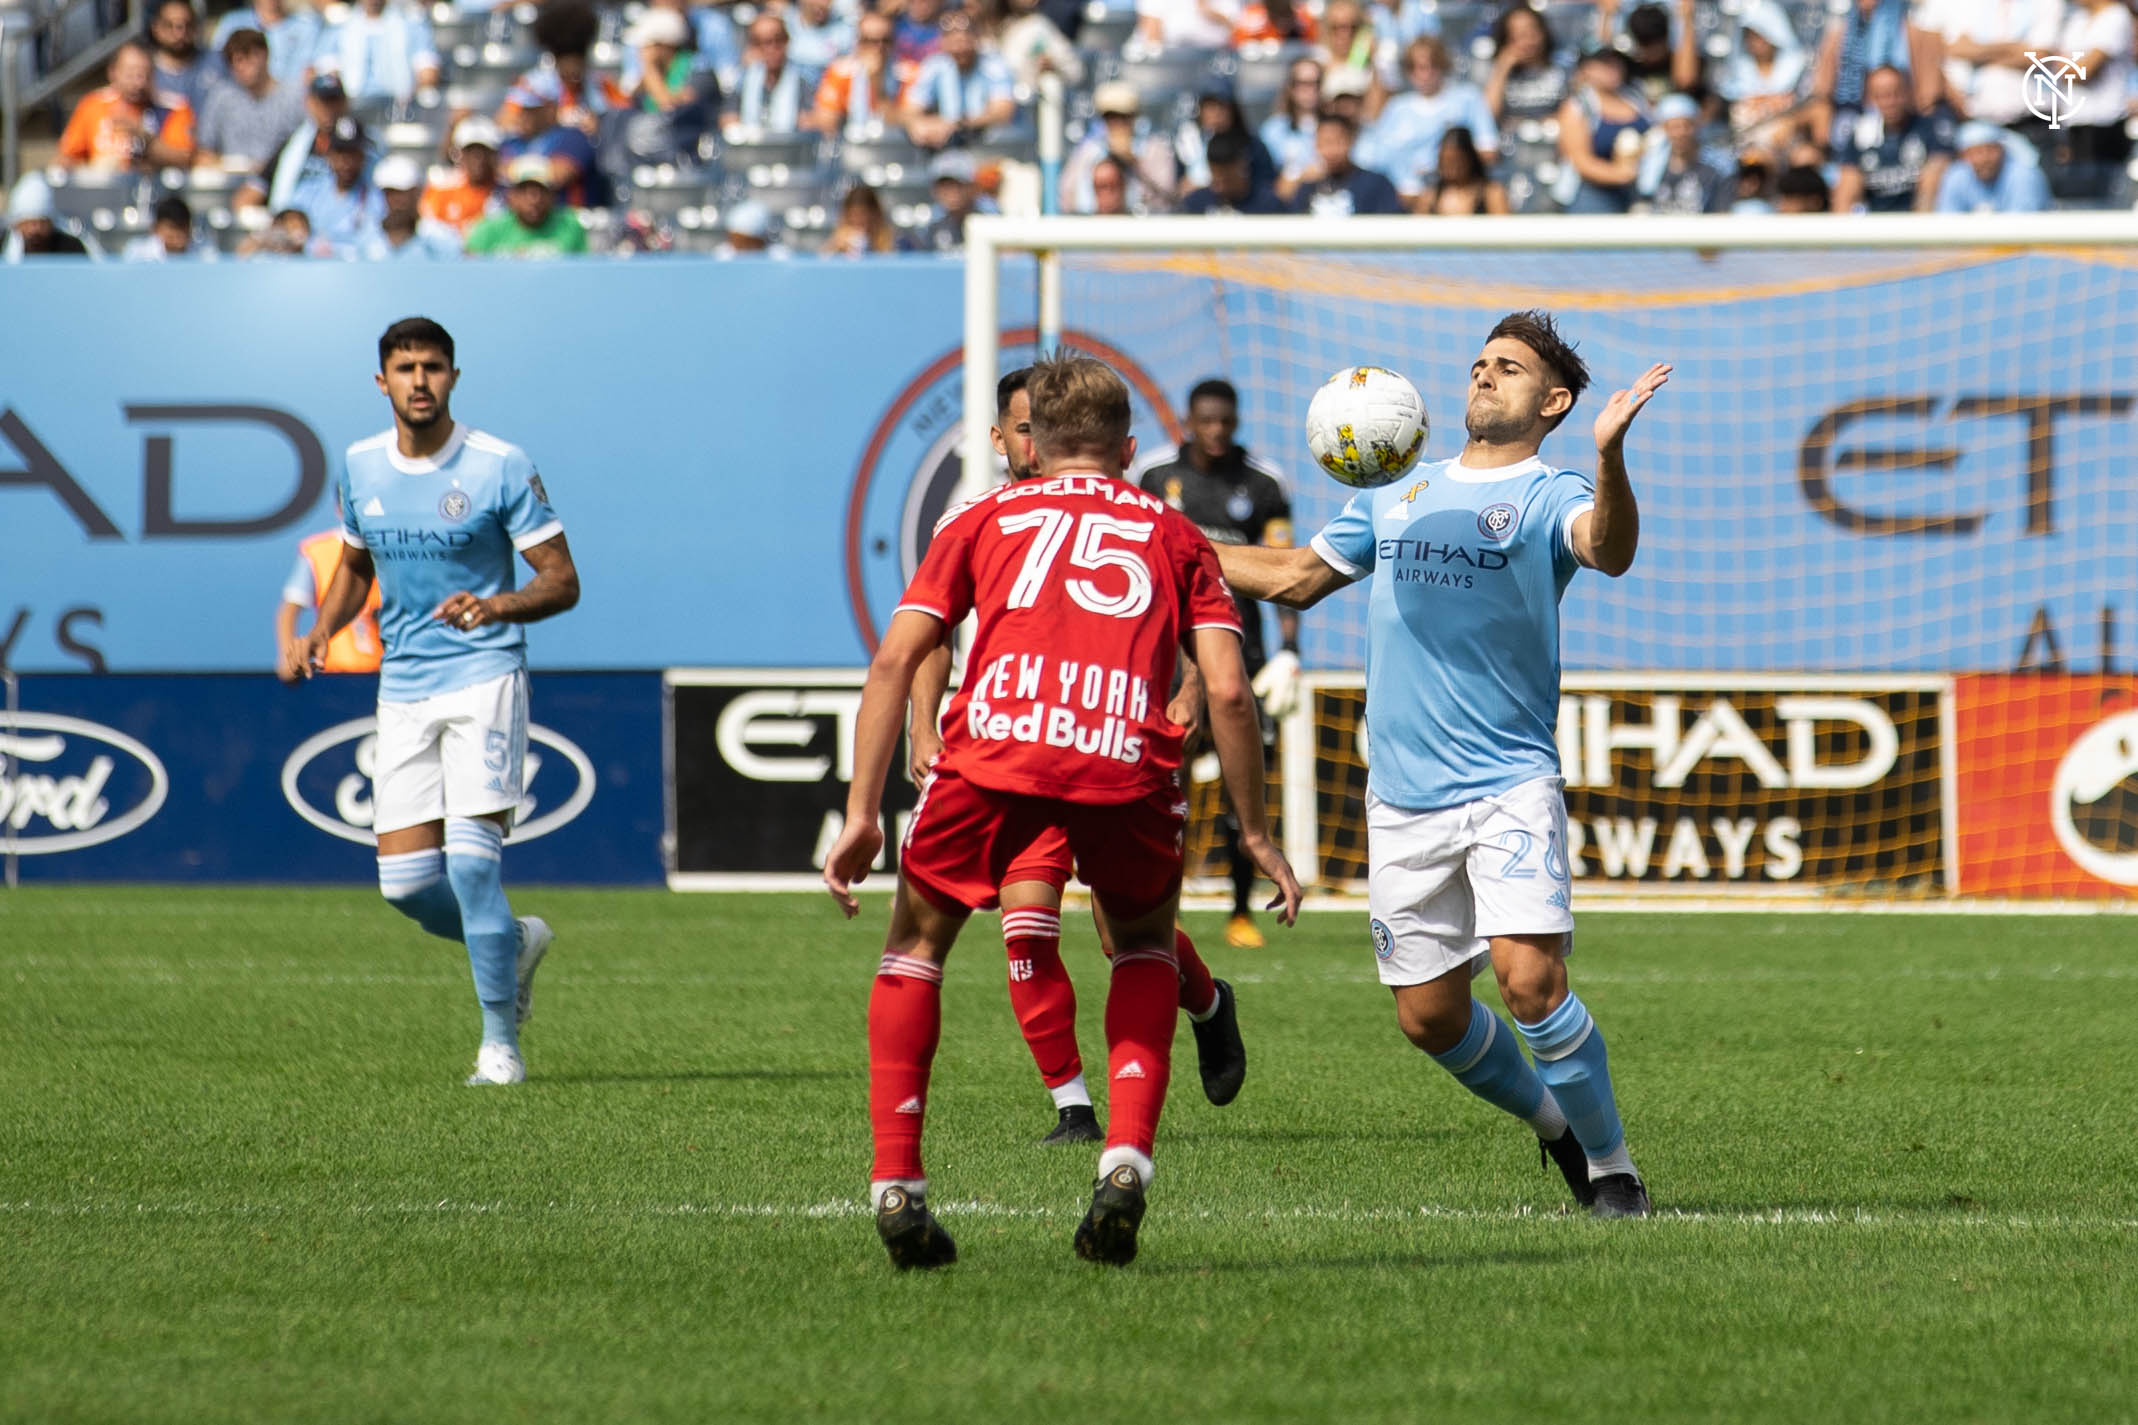 NYCFC looks to regain form after a positive step with a 2-0 win over the New York Red Bulls on September 18, 2022